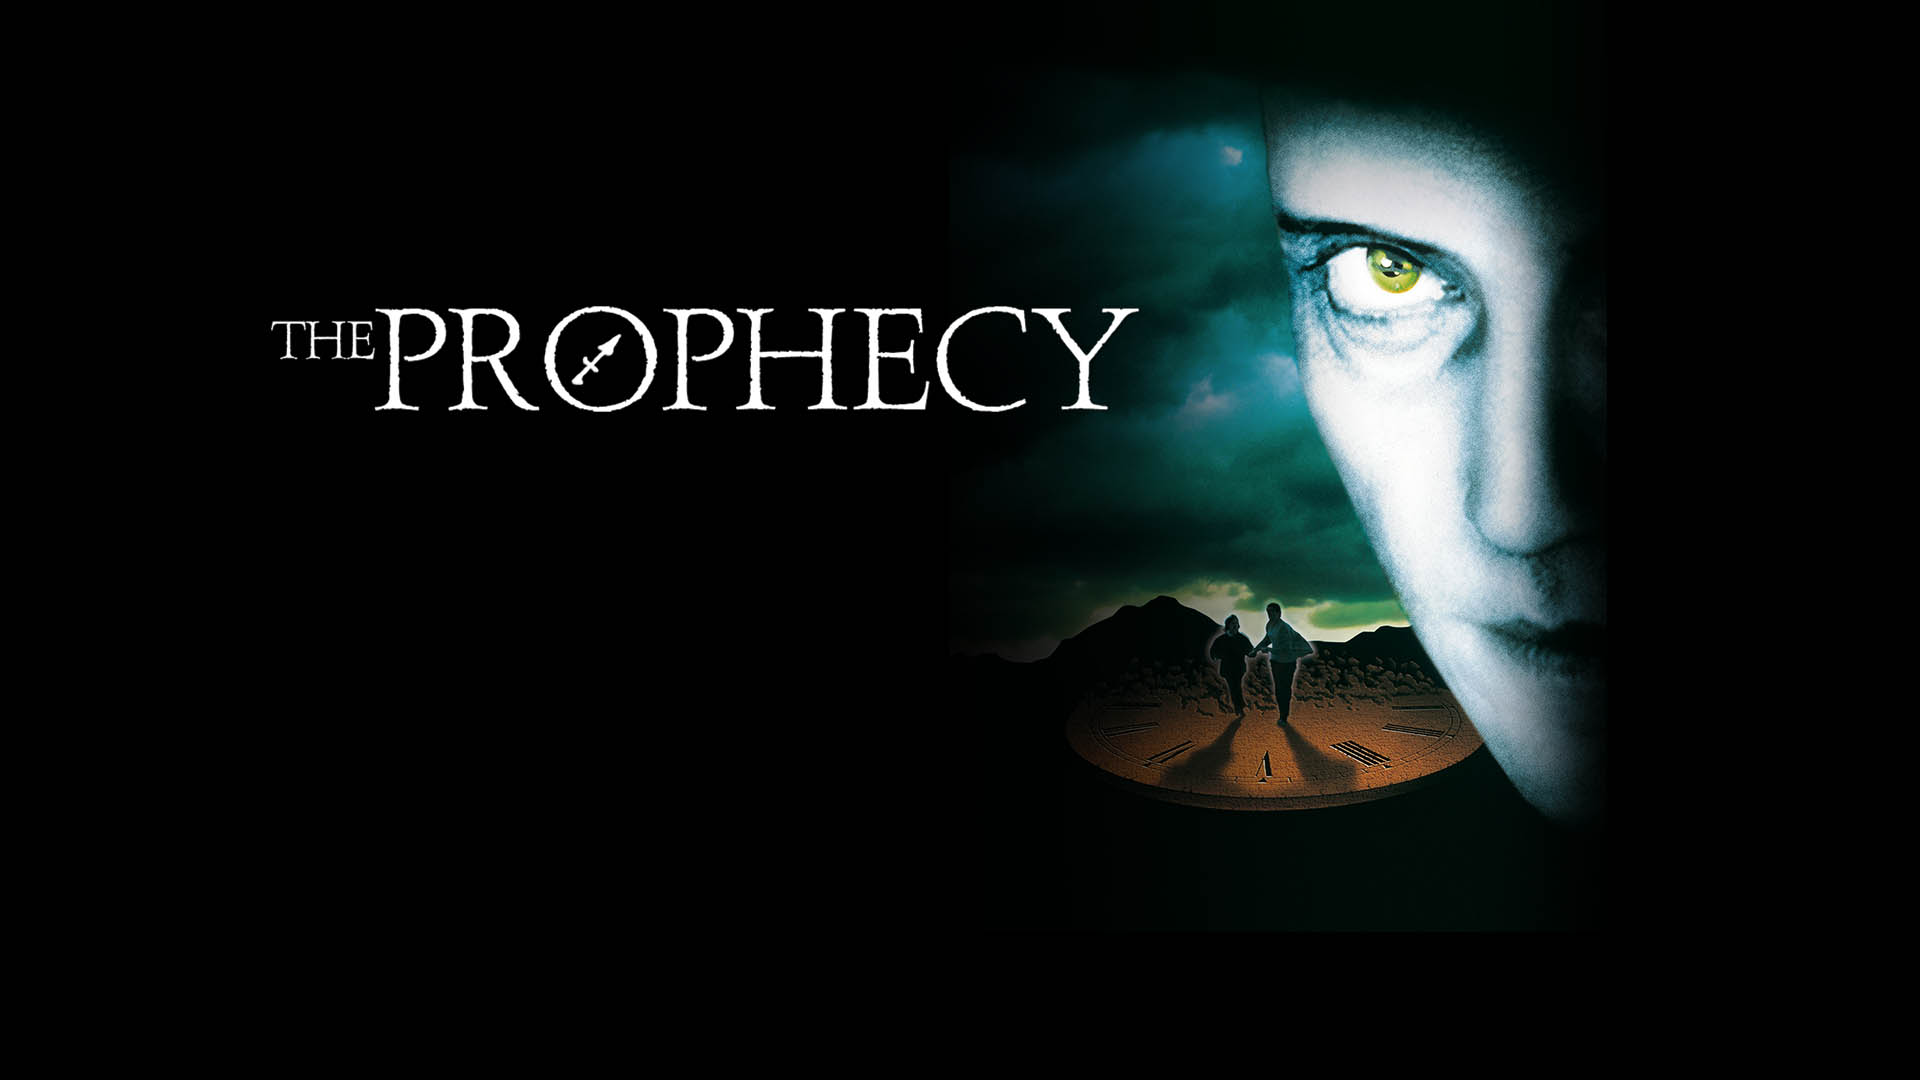 Watch The Prophecy Online | Stream Full Movies